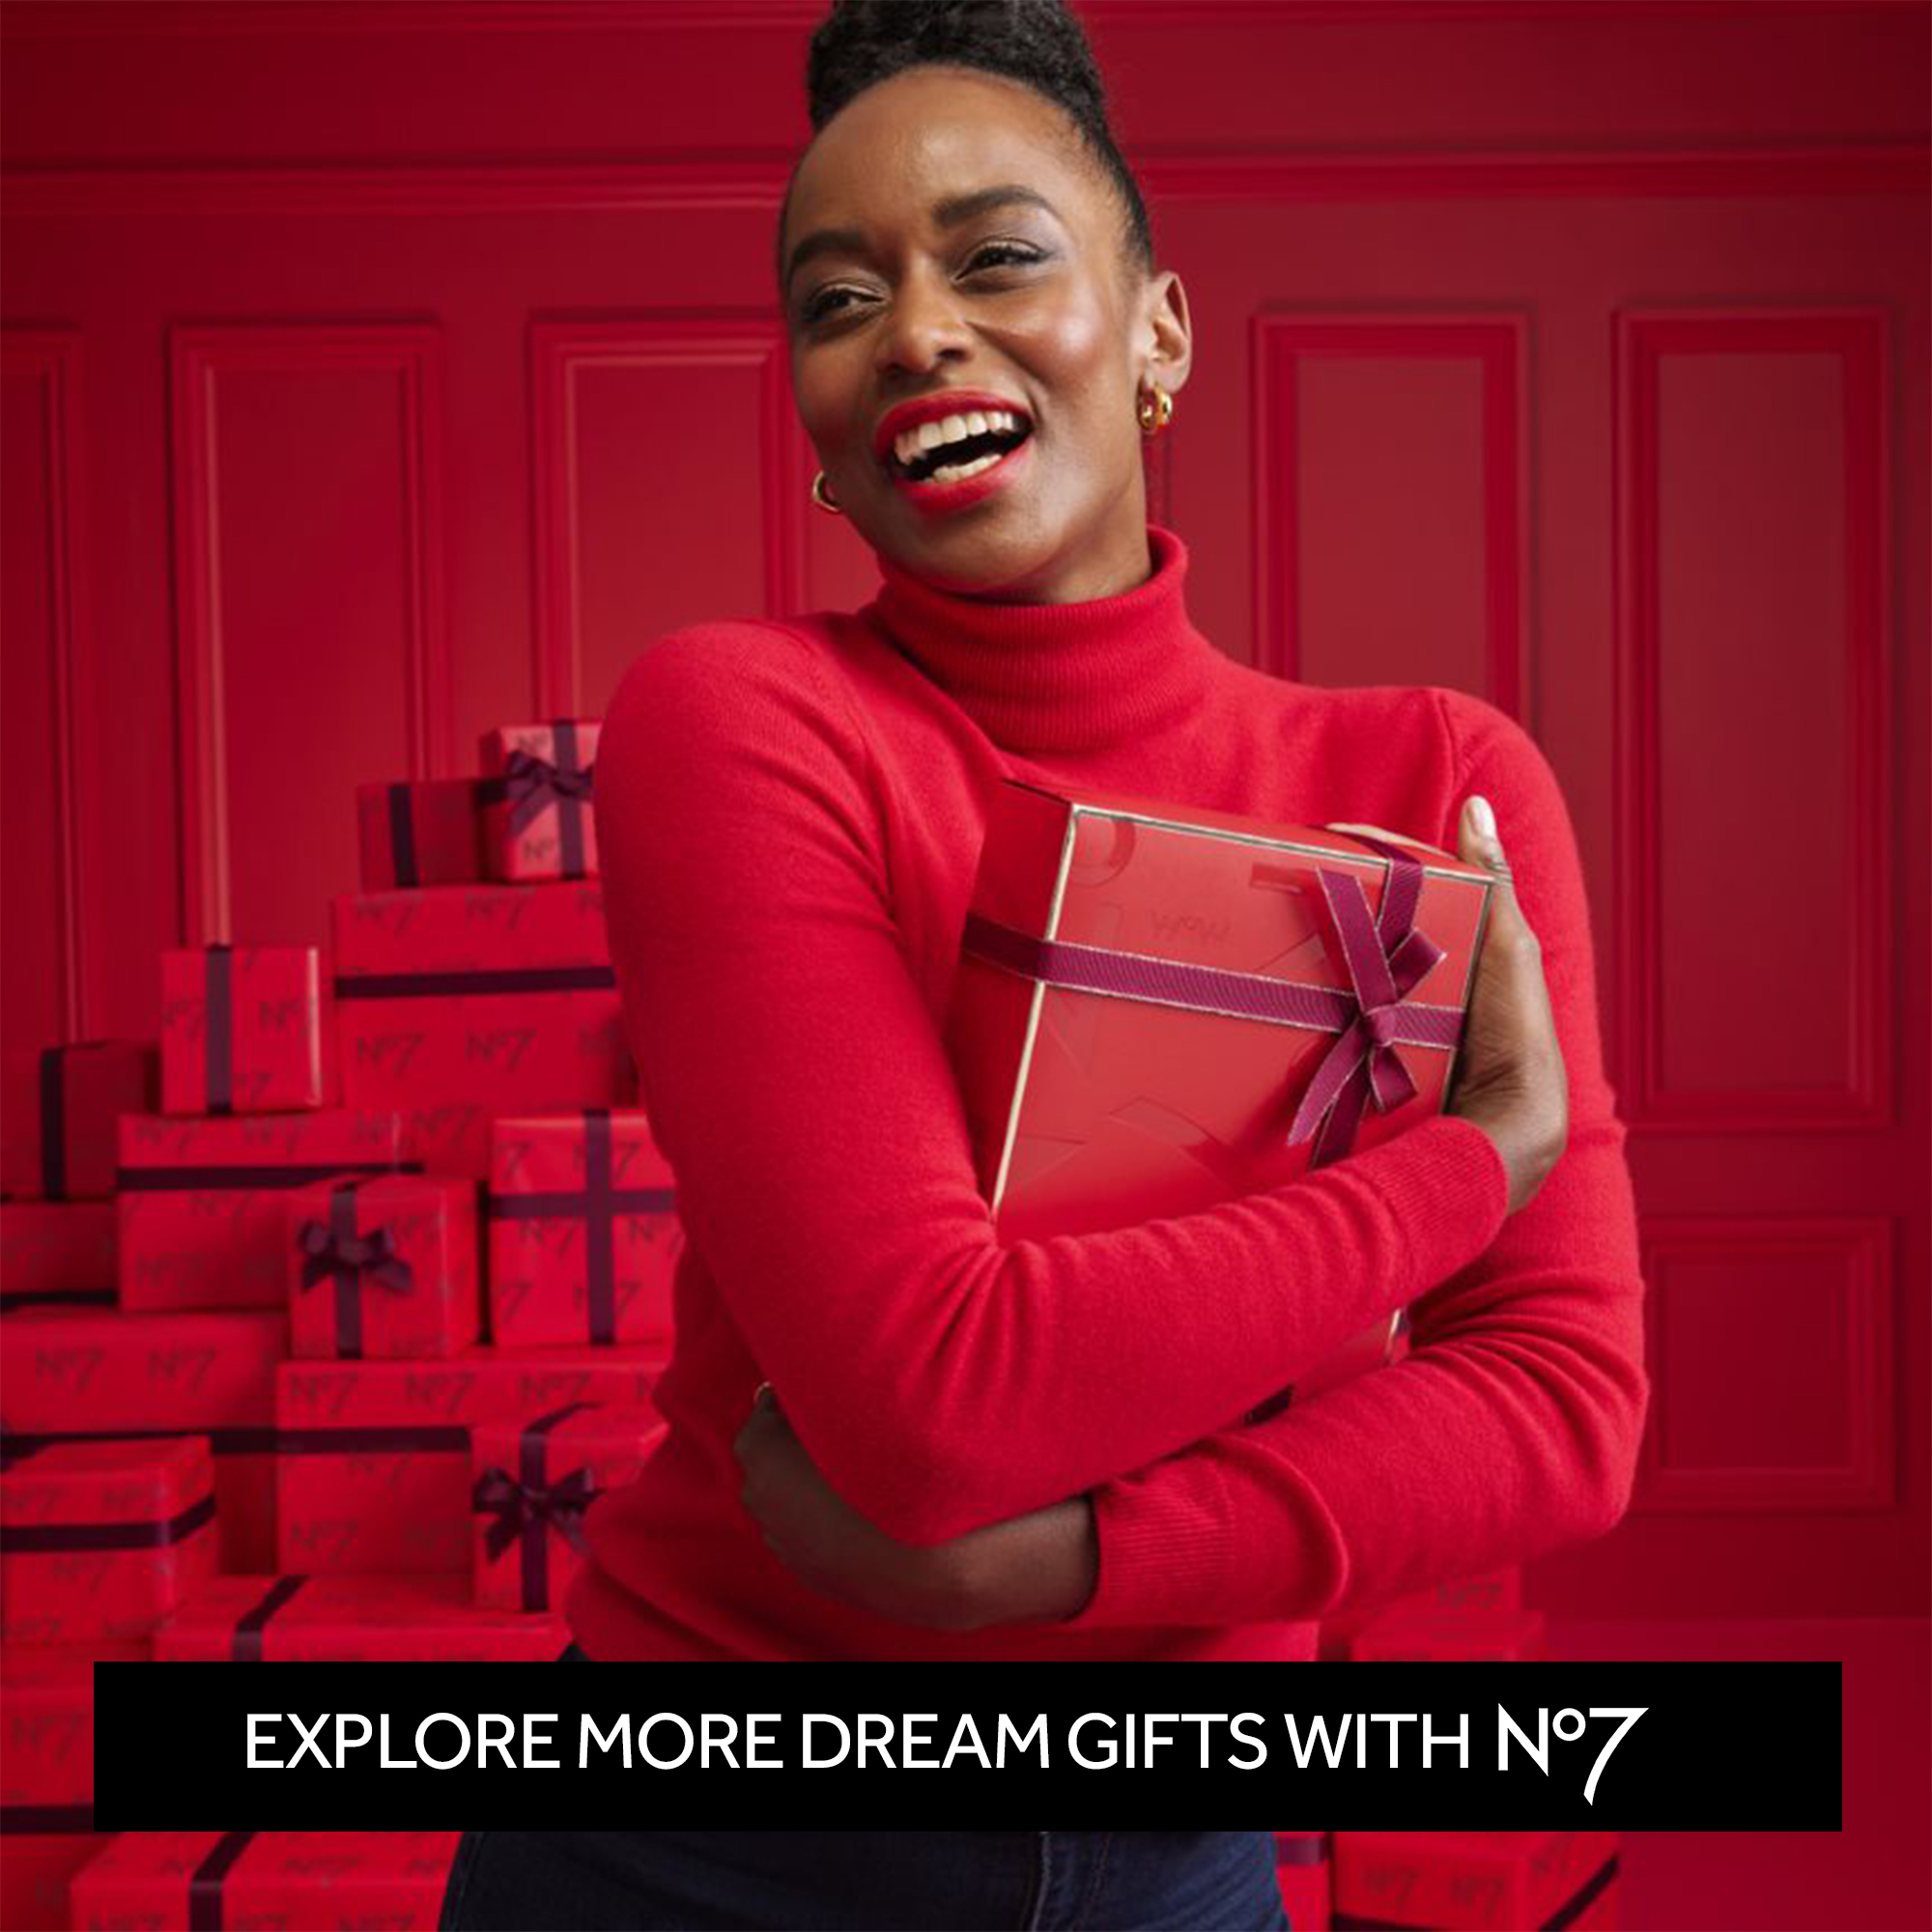 Explore more dream gifts with no7